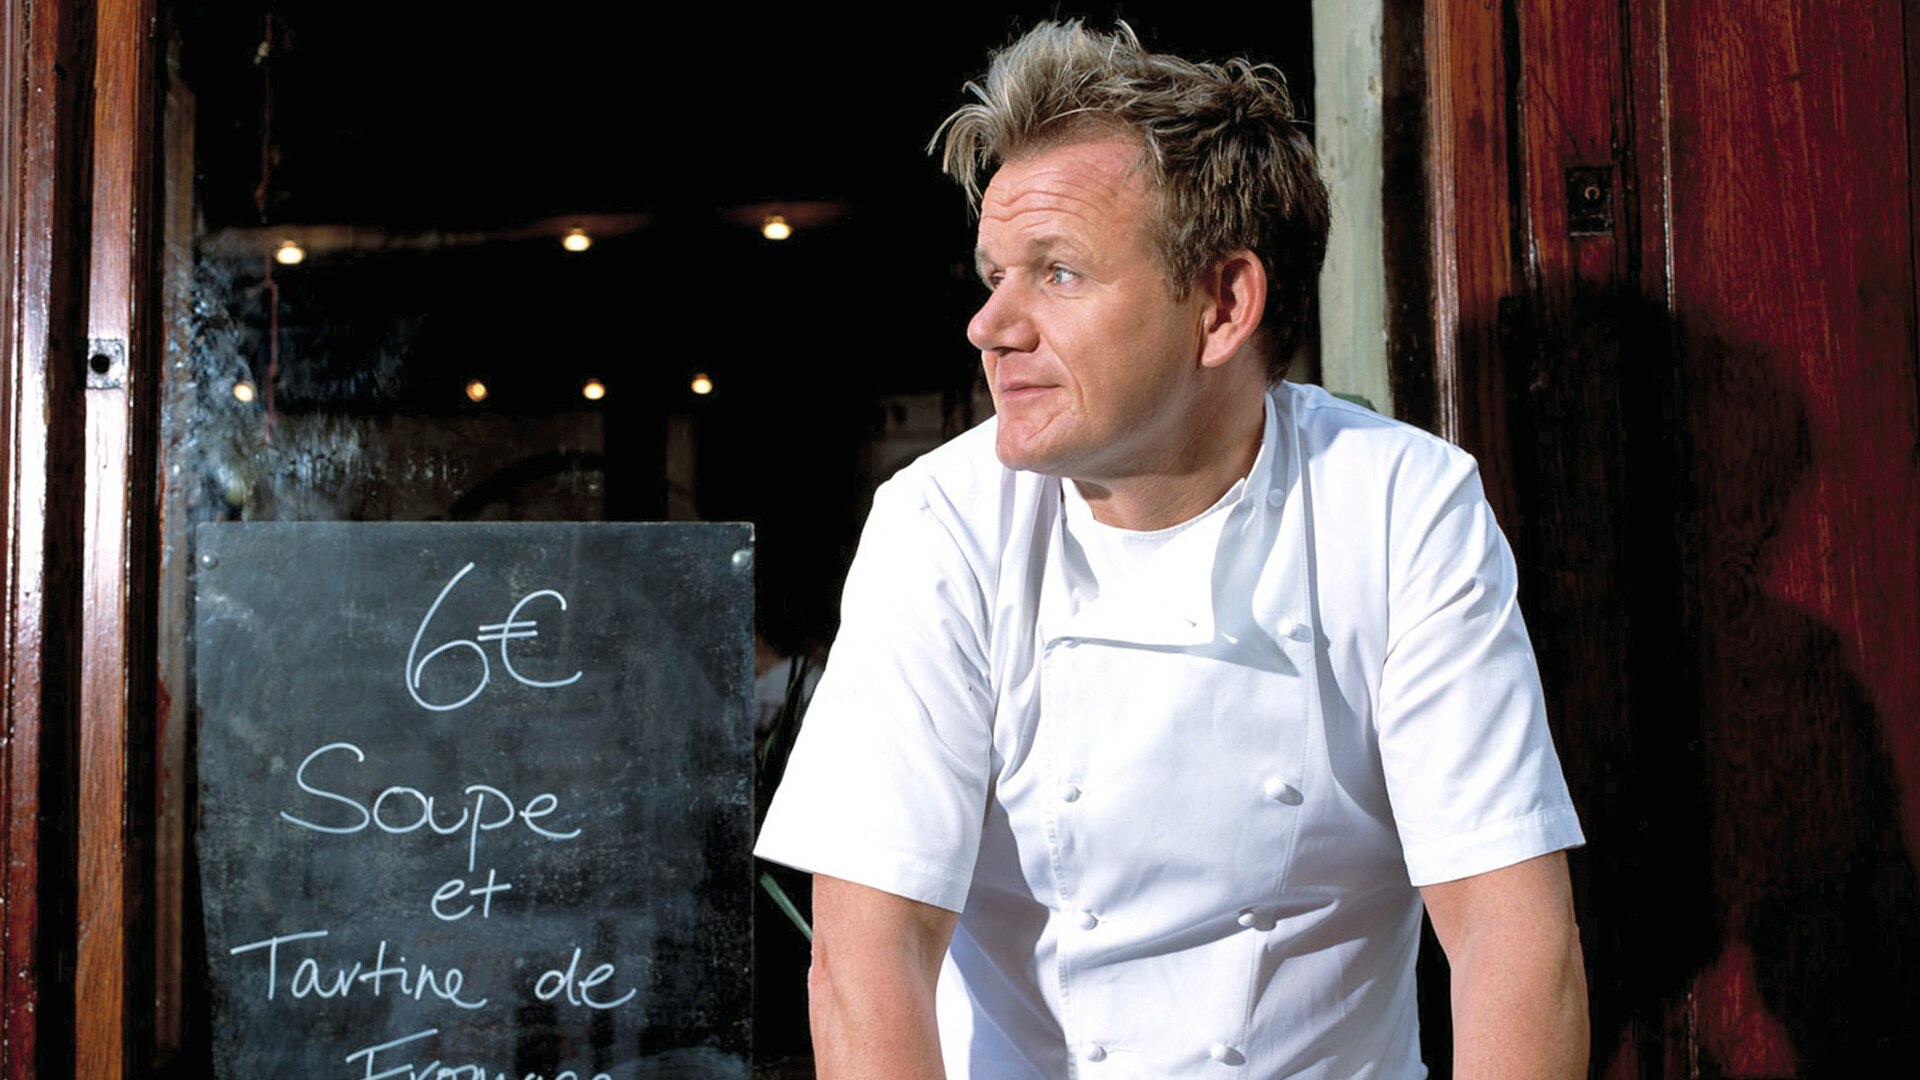 Picture shows Chef Gordon Ramsay, for once not screaming, outside a restaurant